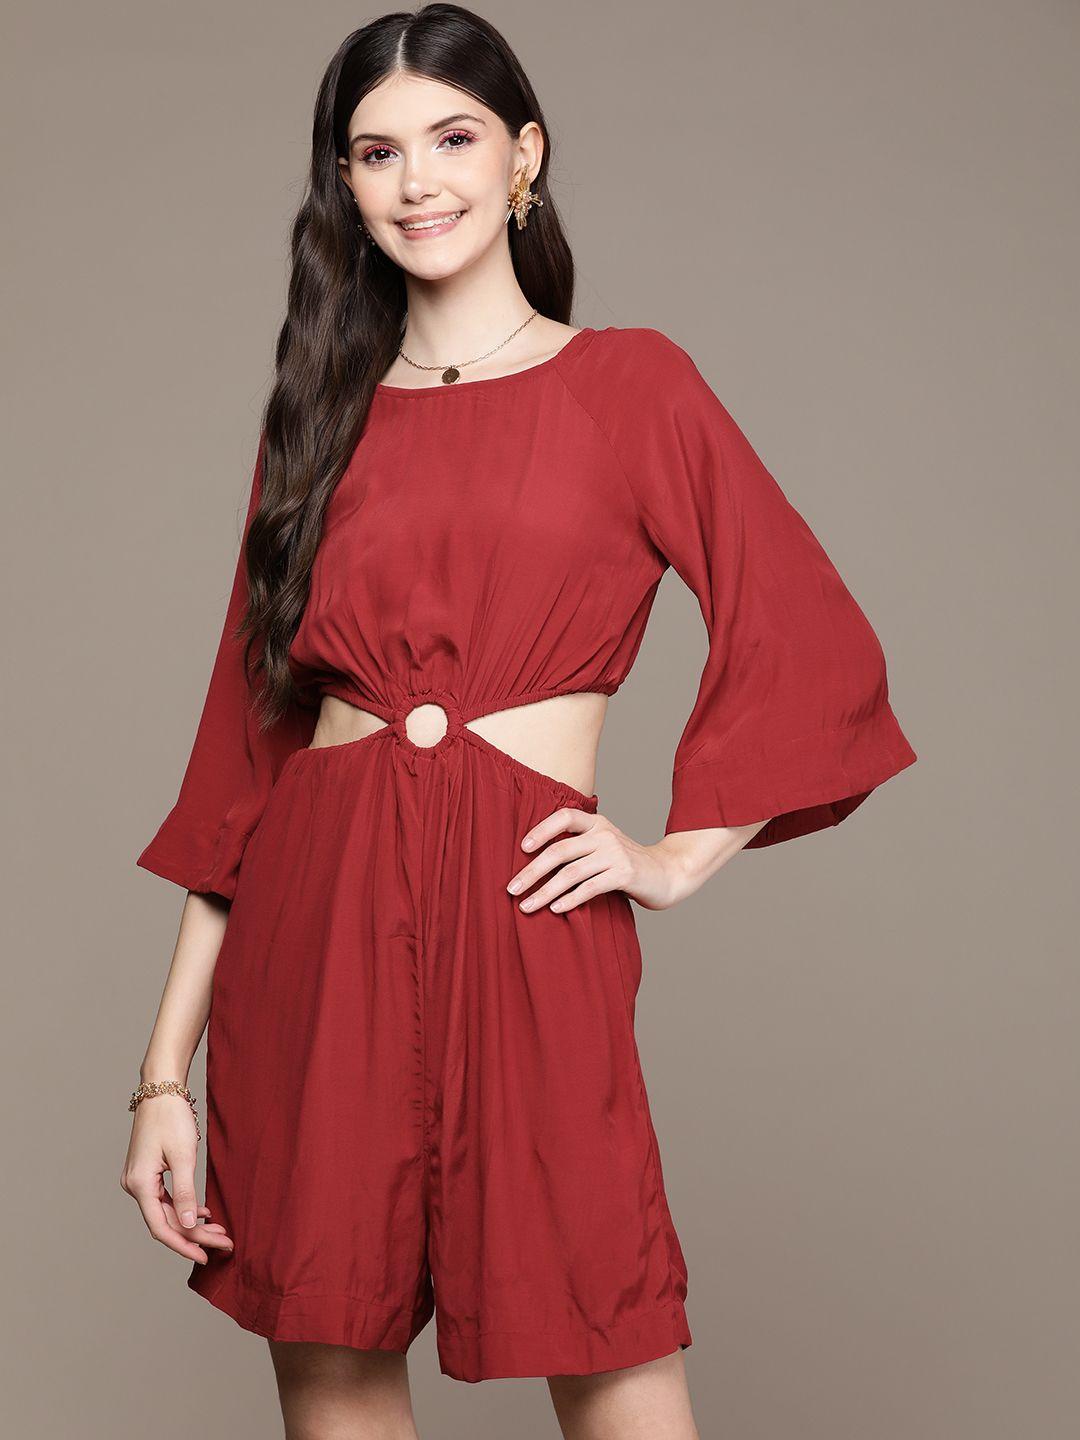 label ritu kumar red cut out play suit